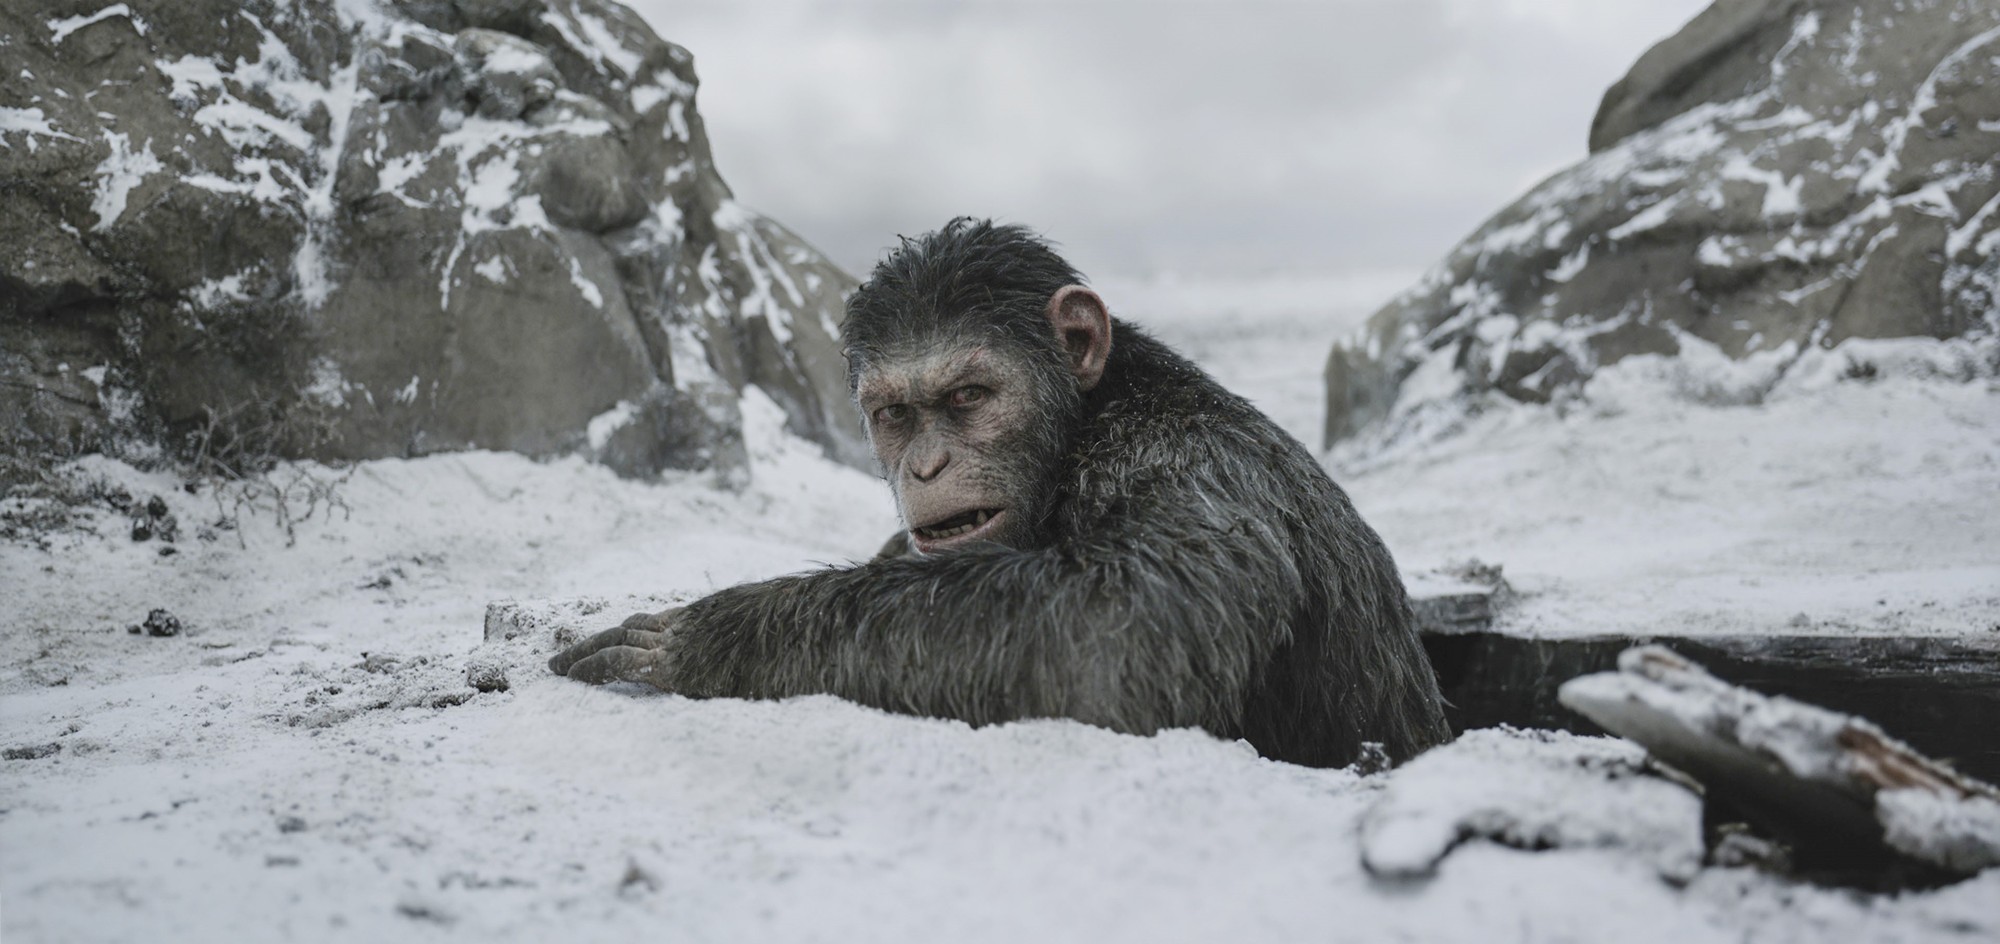 Caesar from 20th Century Fox's War for the Planet of the Apes (2017)